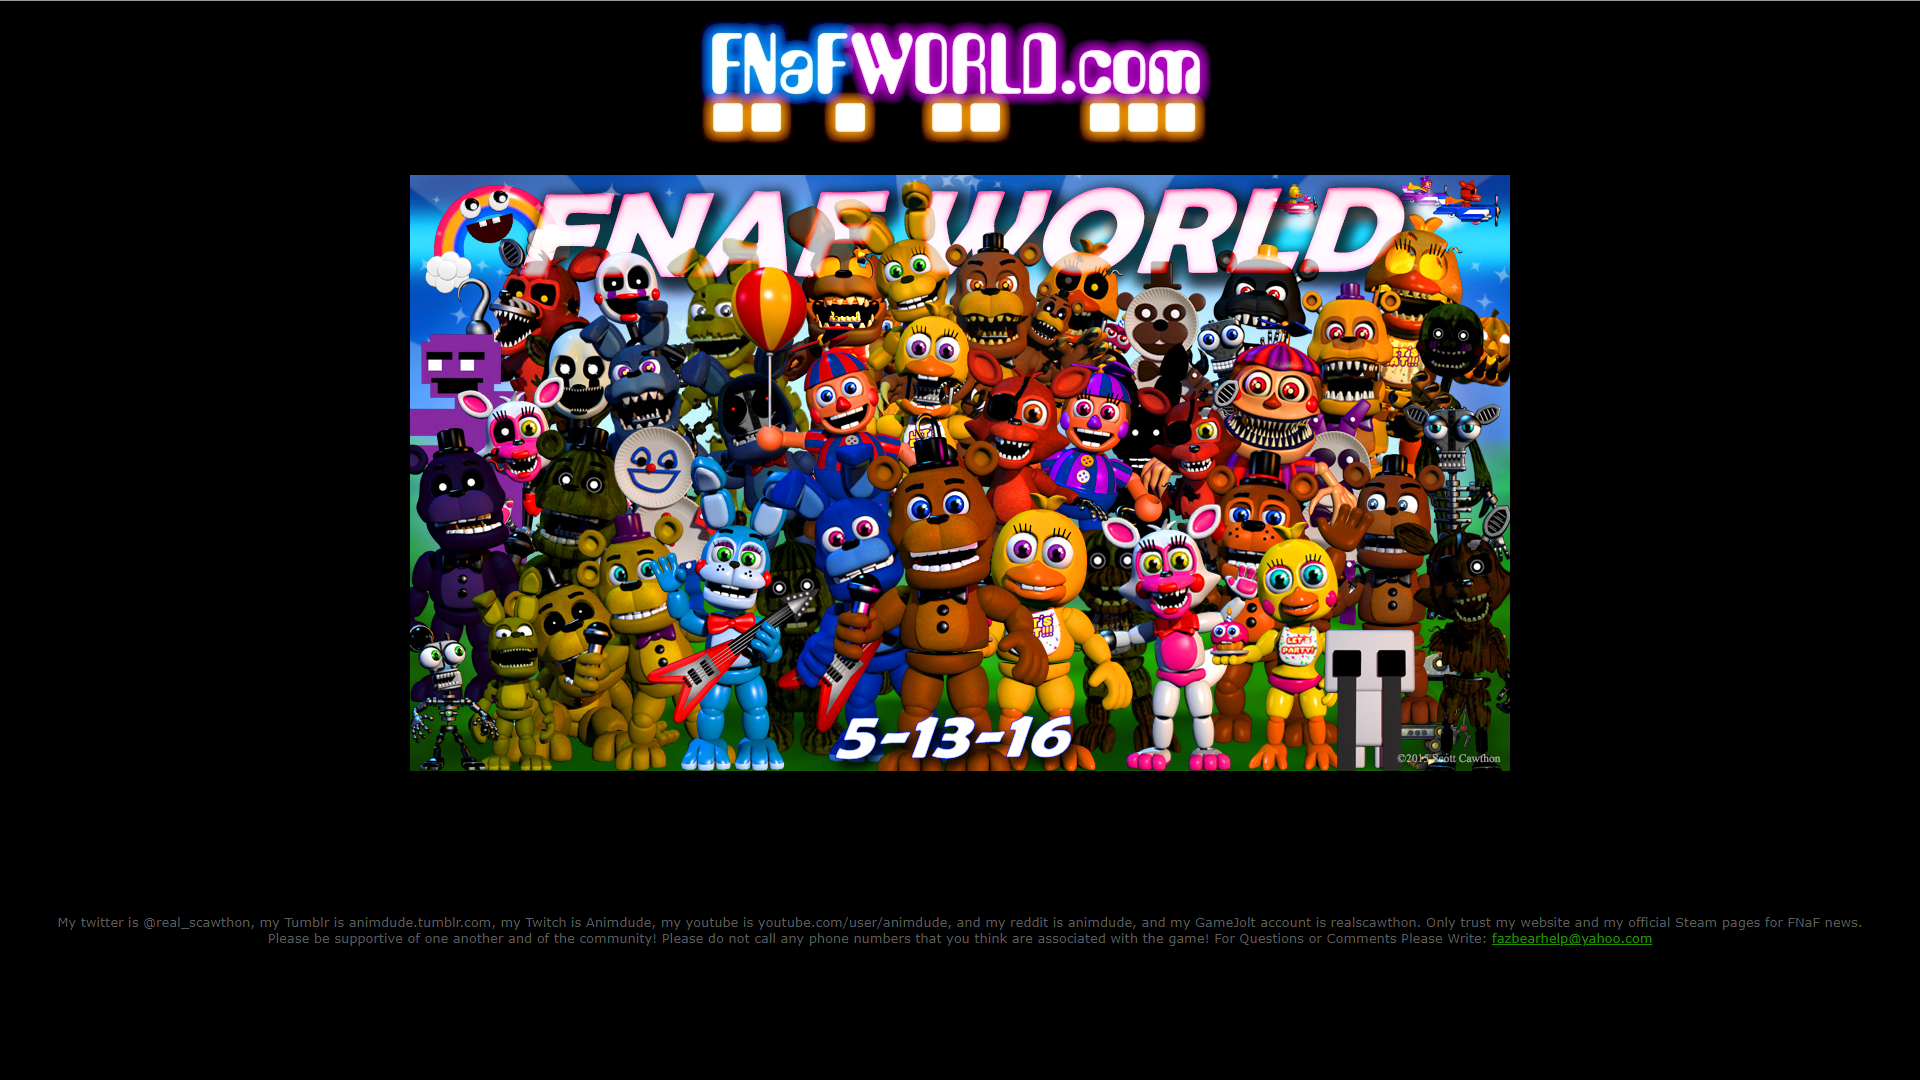 FNaF World - IOS and Android 